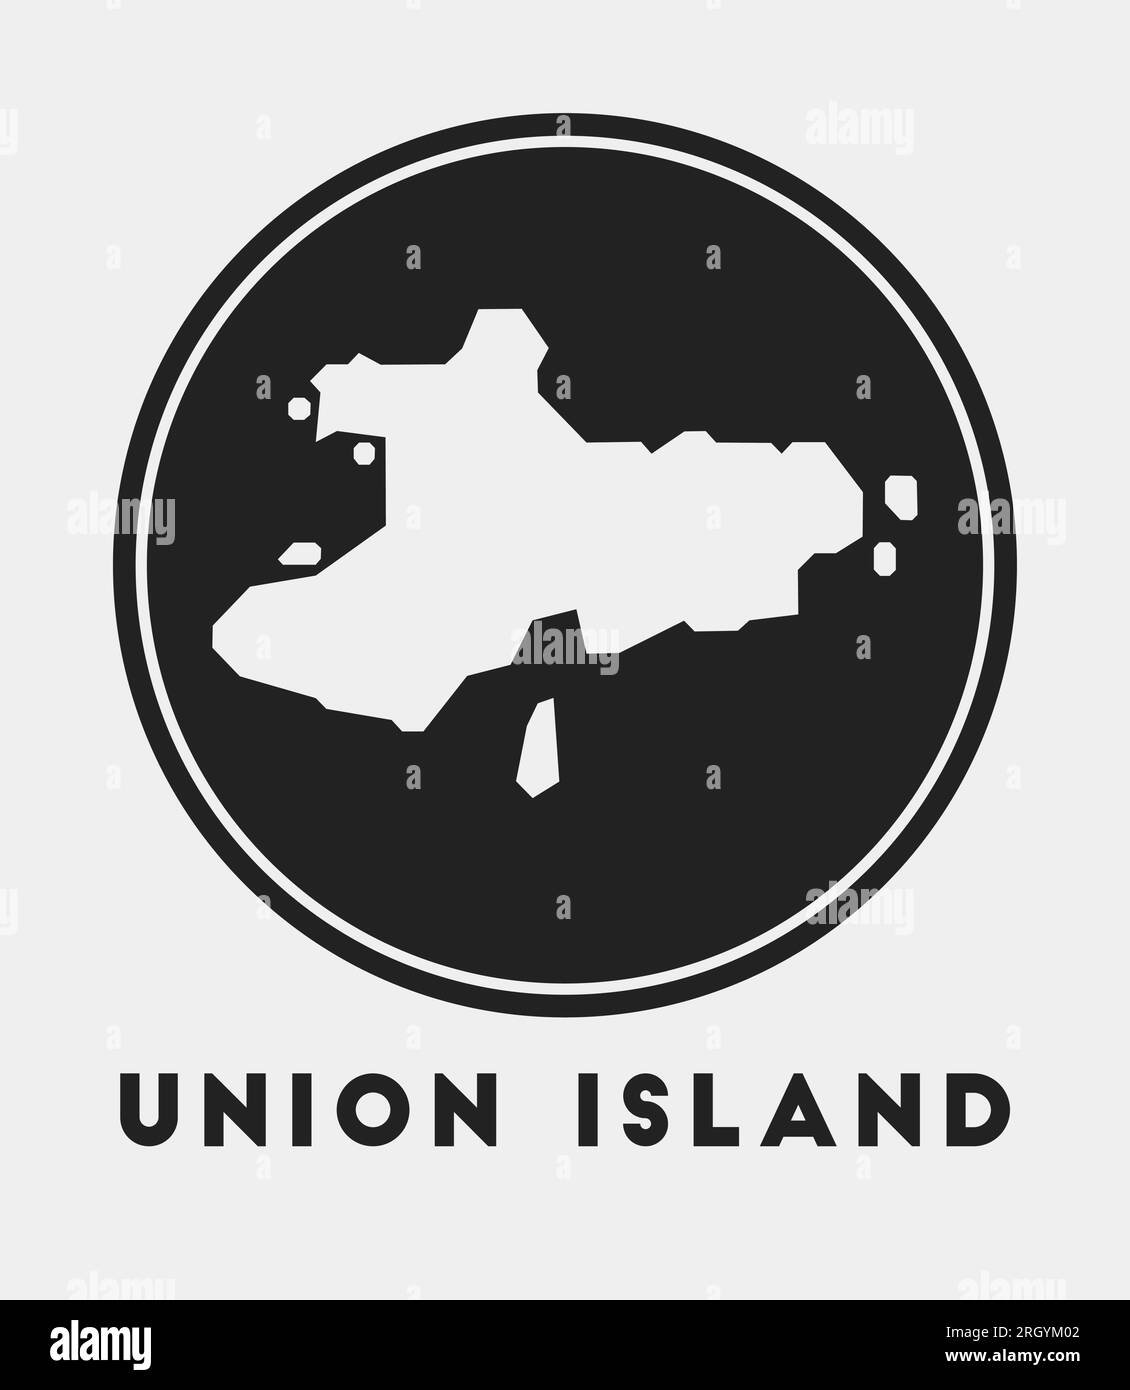 Union Island icon. Round logo with map and title. Stylish Union Island badge with map. Vector illustration. Stock Vector